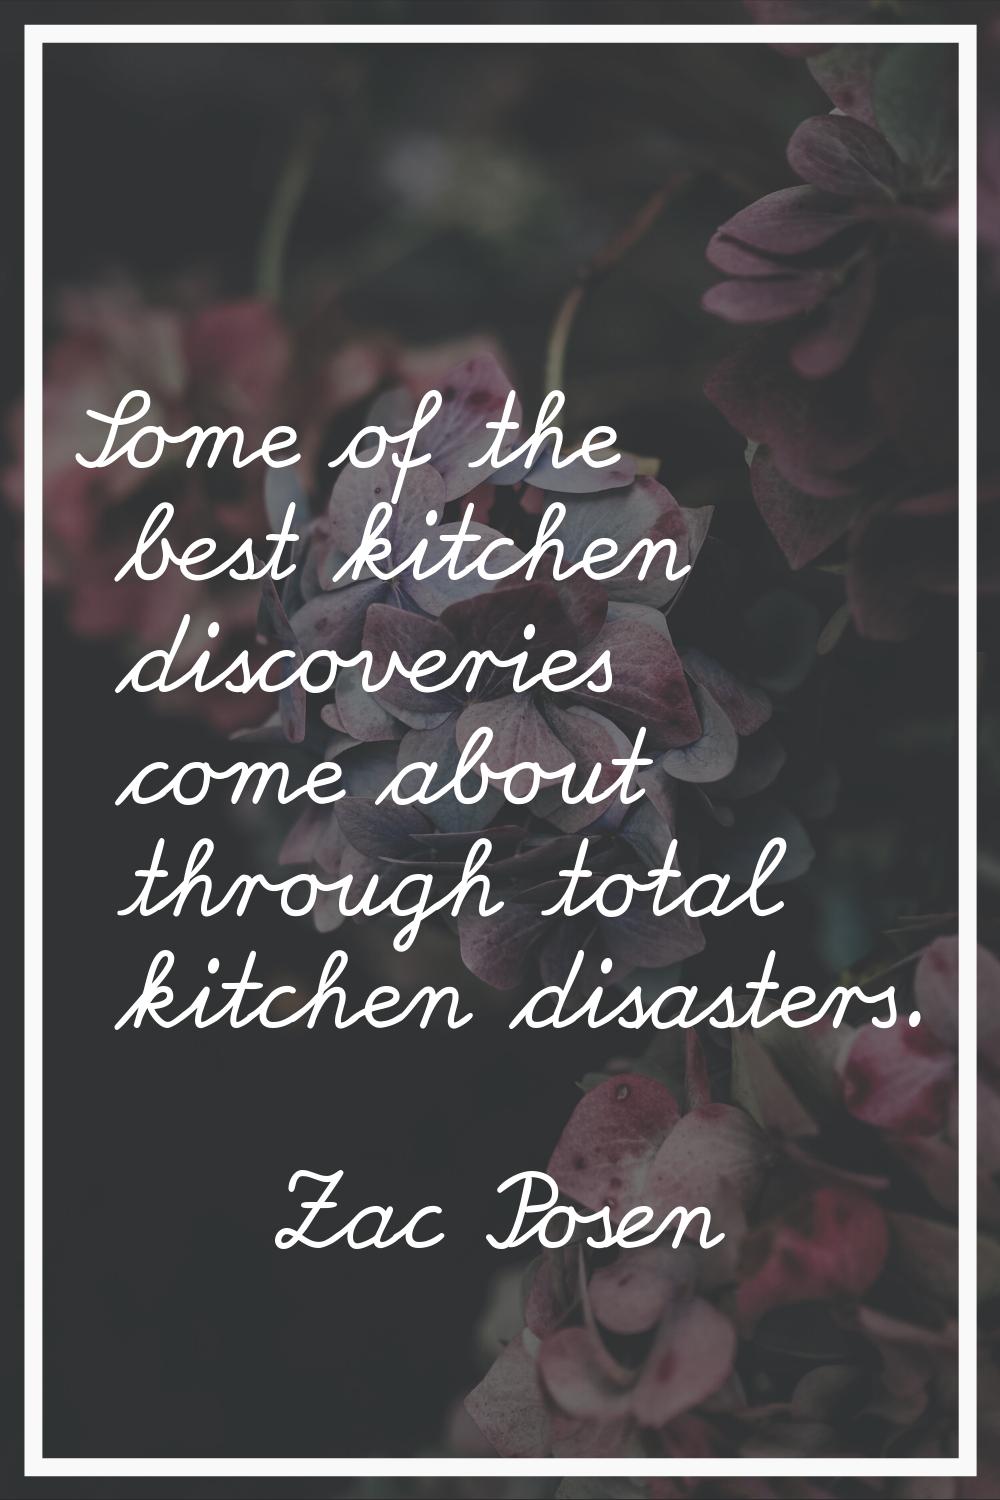 Some of the best kitchen discoveries come about through total kitchen disasters.